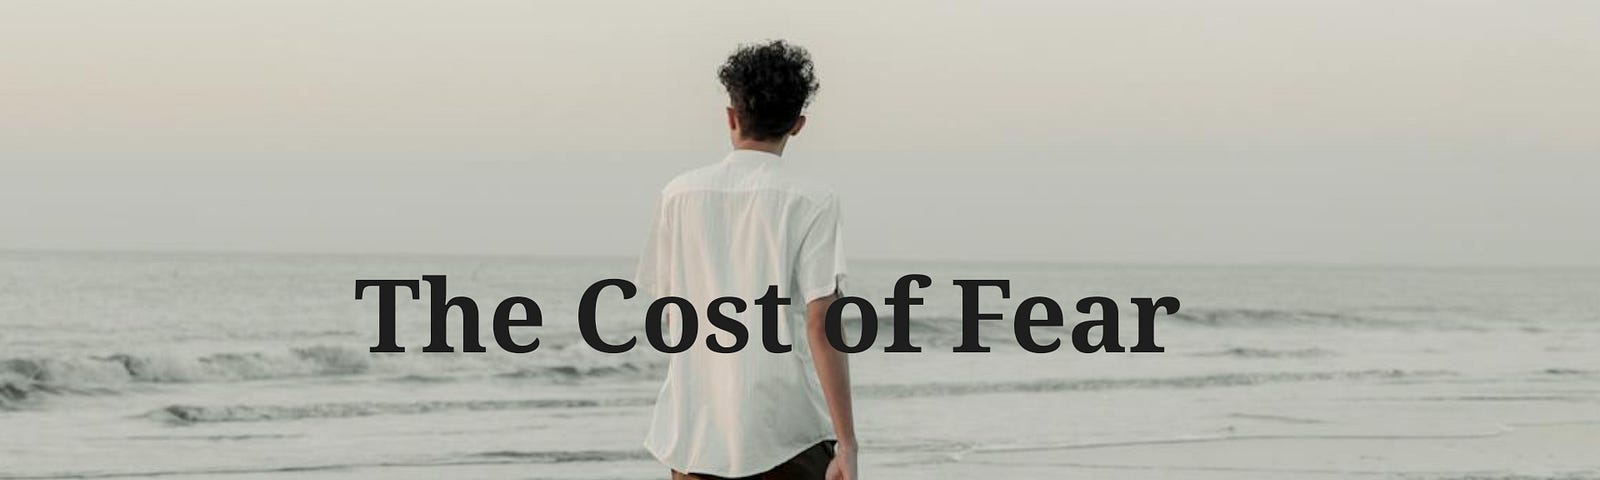 The back view of a man walking on the seashore with the text "The Cost of Fear" overlayed on it